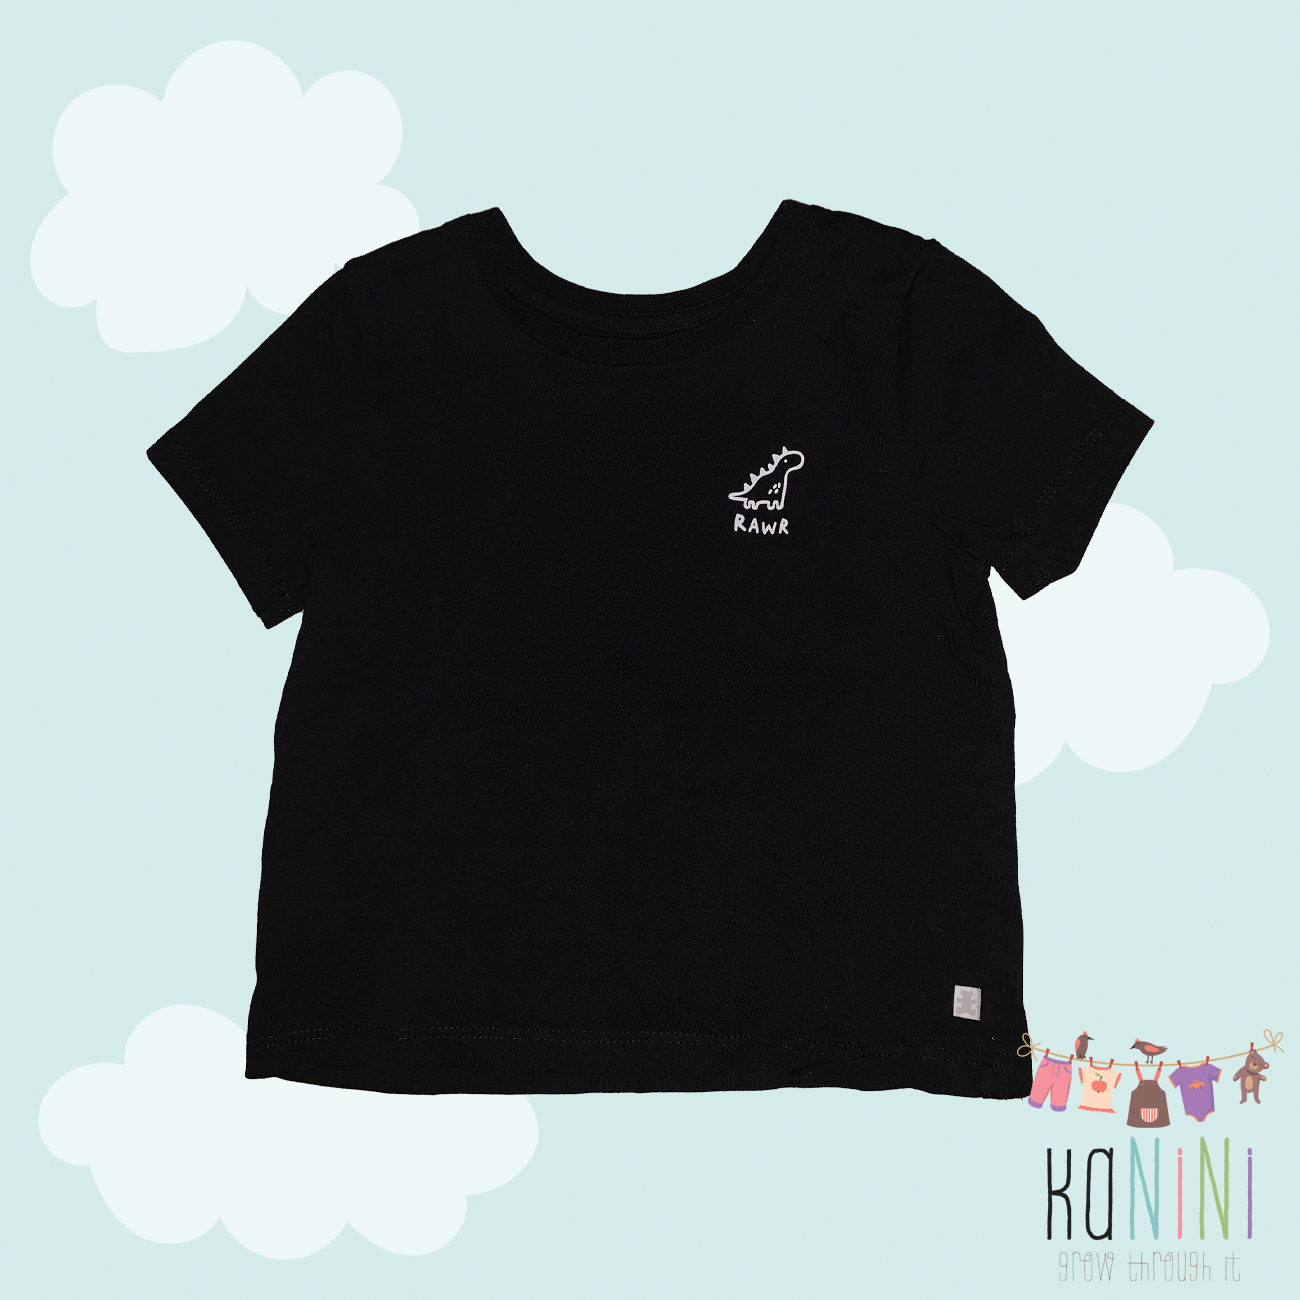 Featured image for “Woolworths 12 - 18 Months Boys Black T-Shirt”